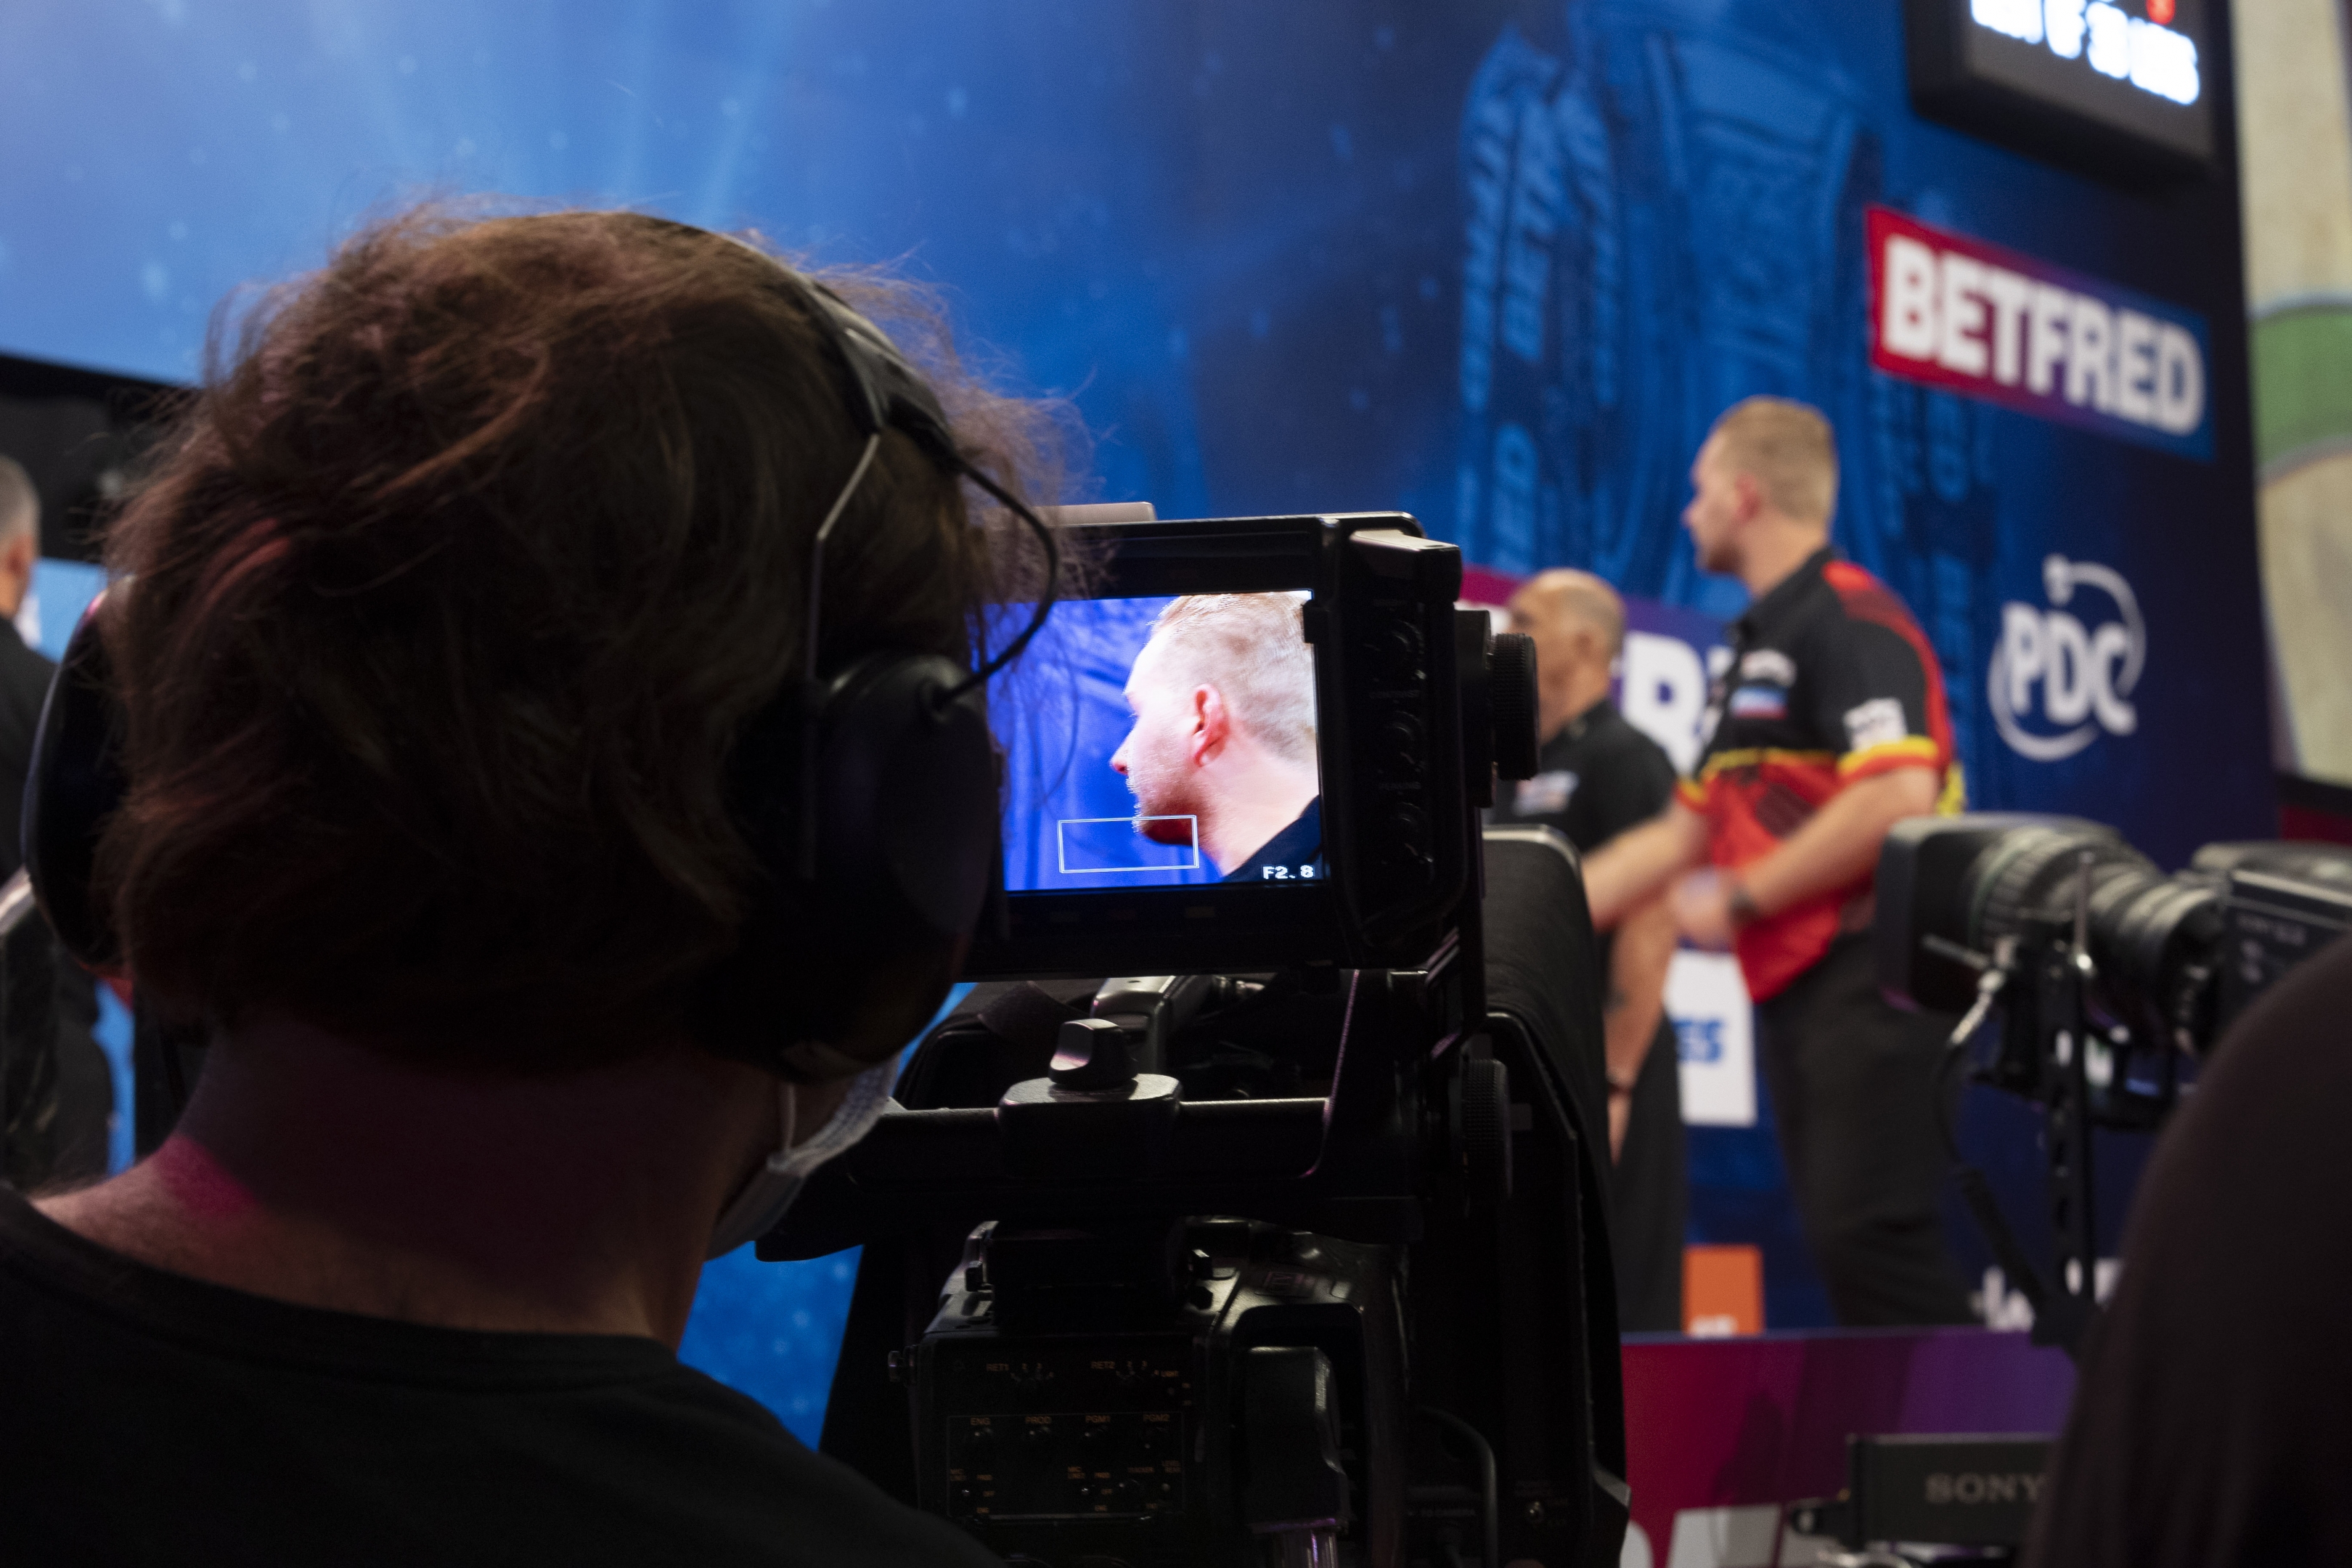 How to watch the 2022 Betfred World Matchplay PDC